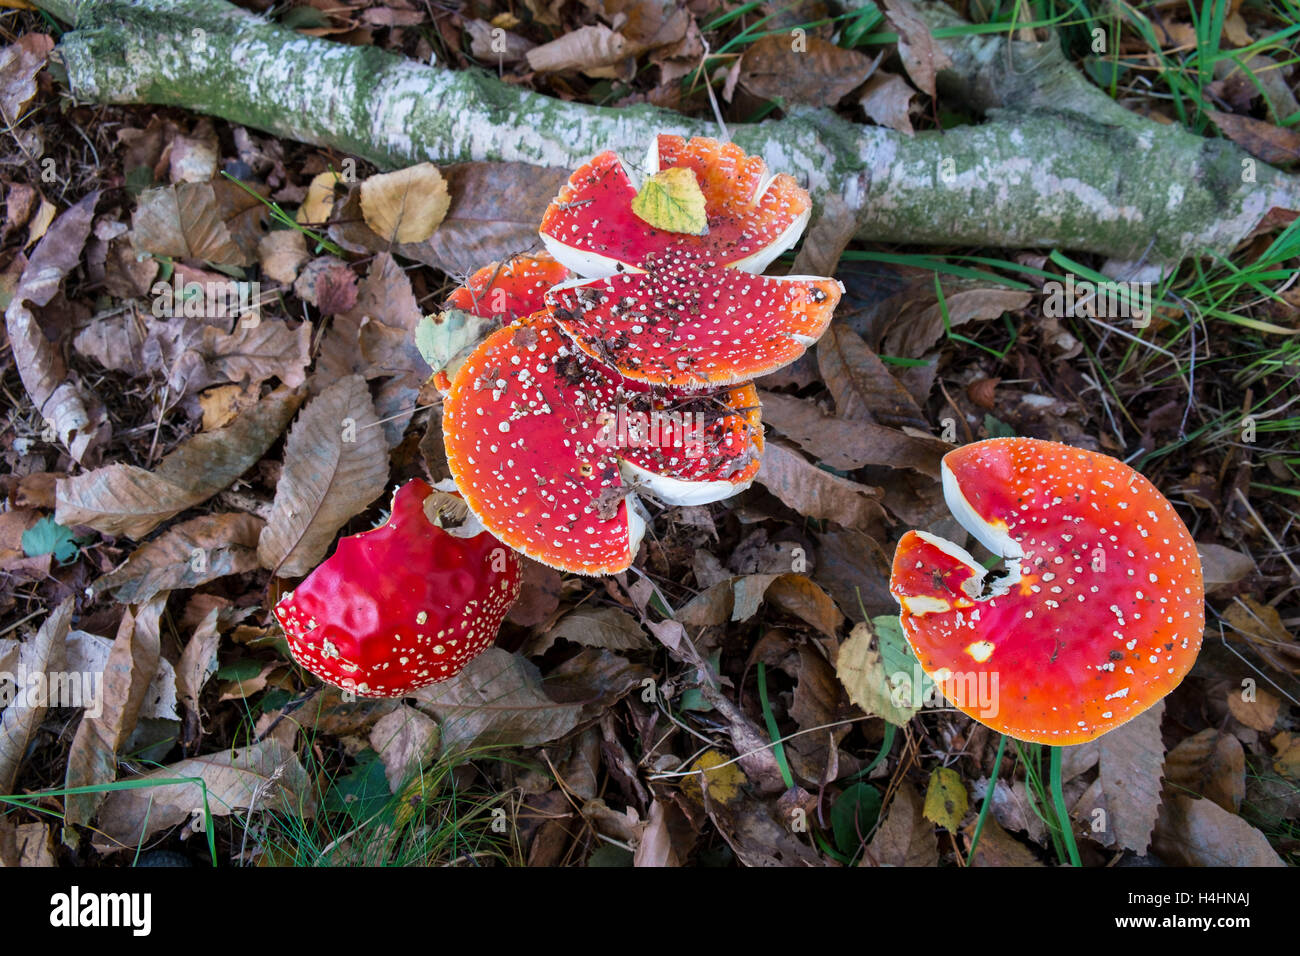 Amanita muscaria, commonly known as the fly agaric or fly amanita. Stock Photo